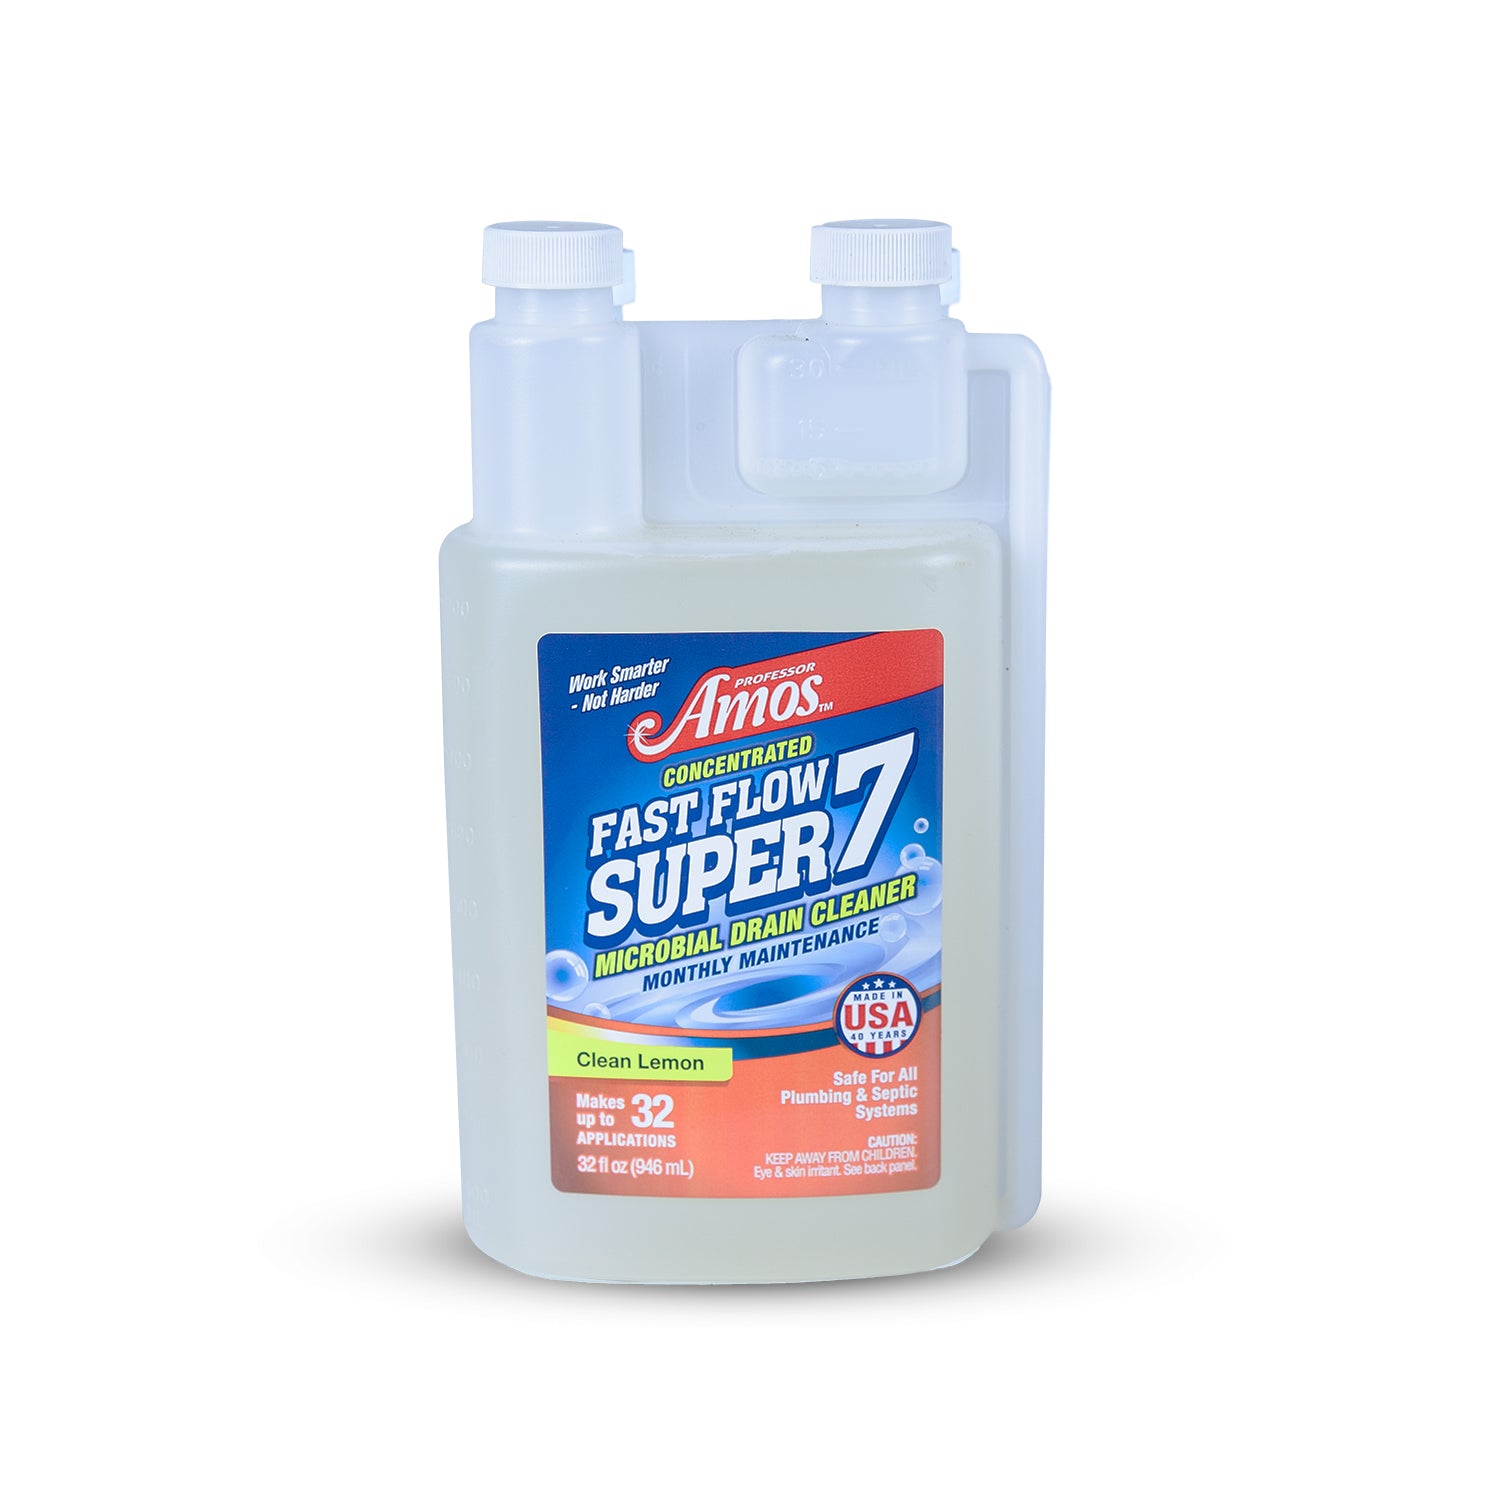 Professor Amos Fast Flow Super 7 Concentrated Natural Microbial Drain Cleaner – Monthly Maintenance